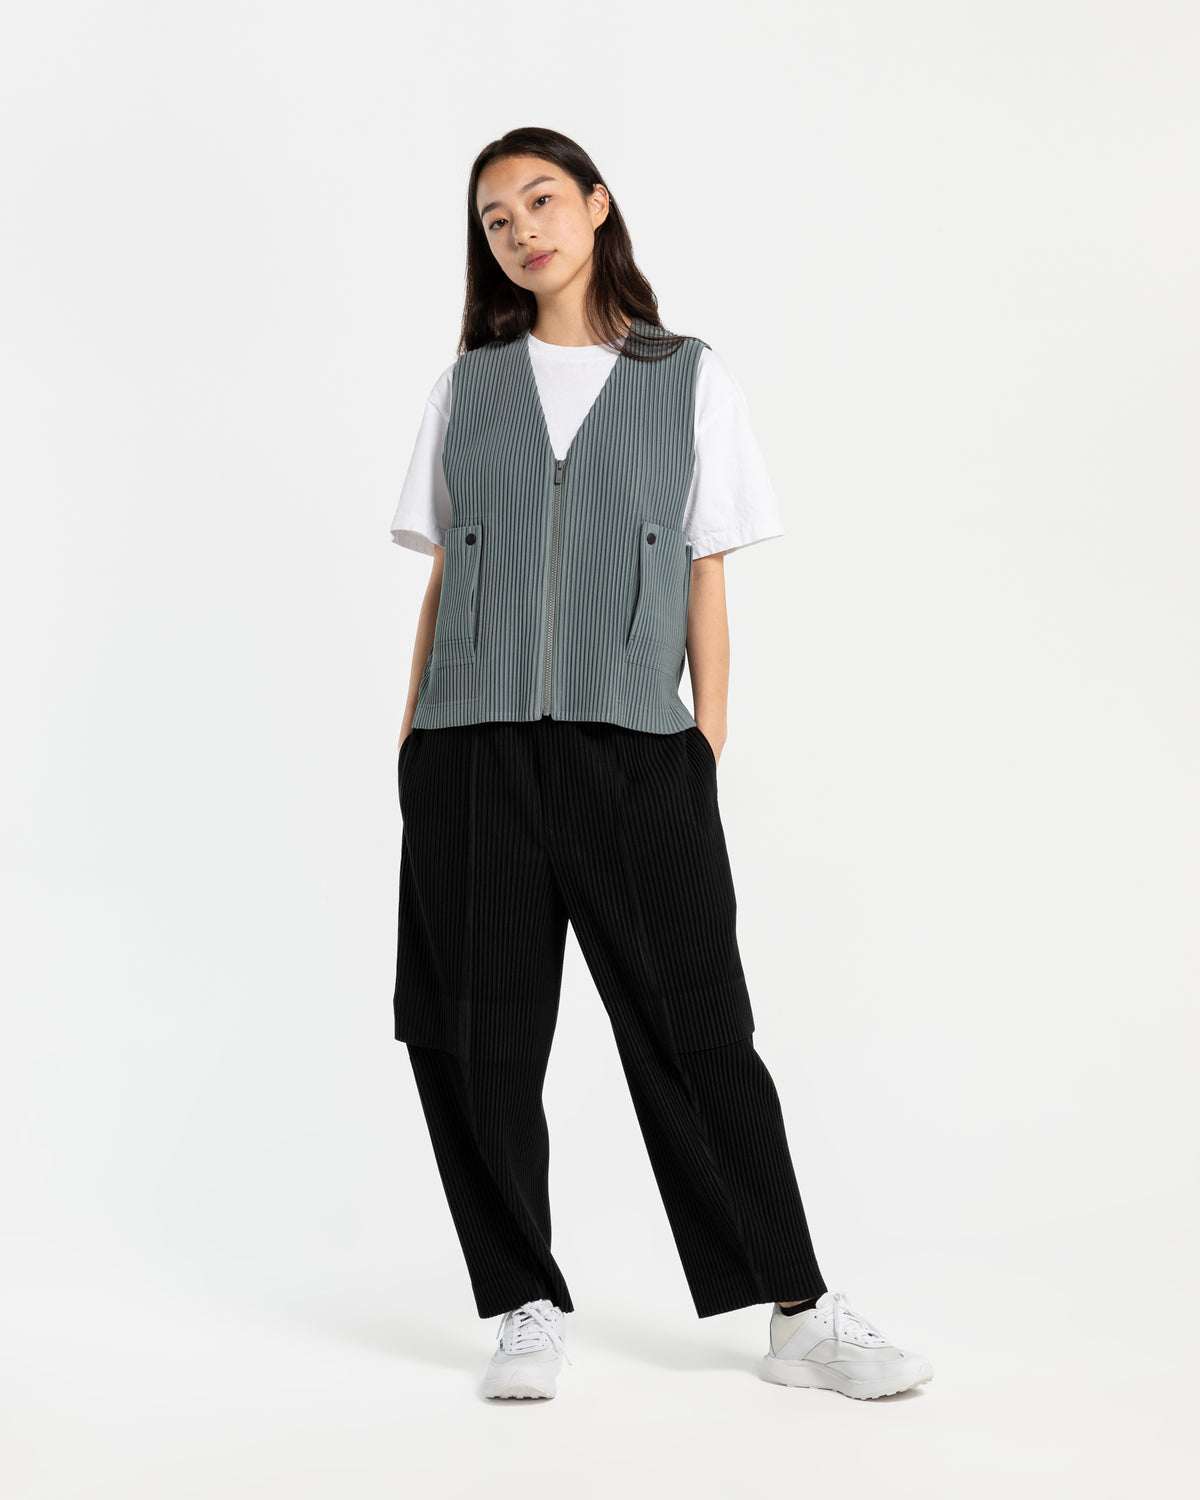 Flip Vest in Moss Gray Homme Plissé Issey Miyake Explore the World